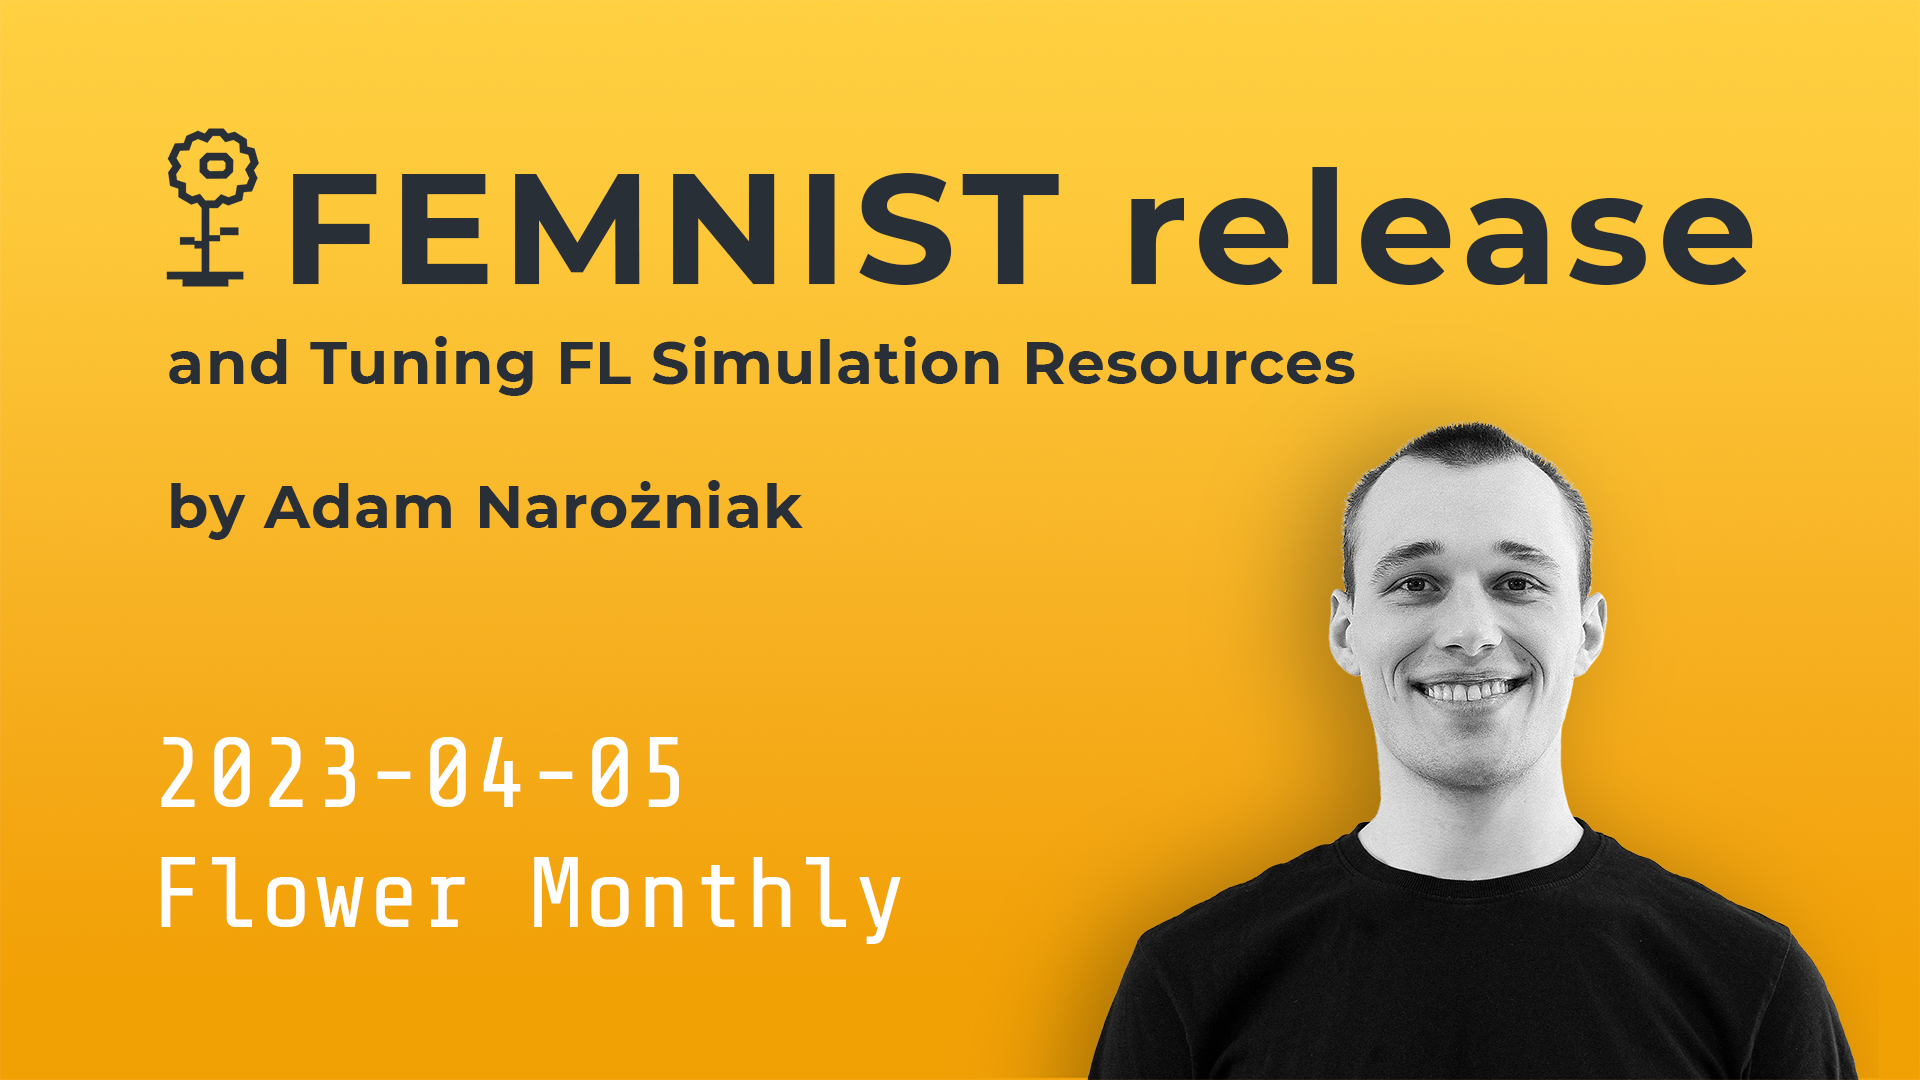 FEMNIST release and Tuning FL Simulation Resources